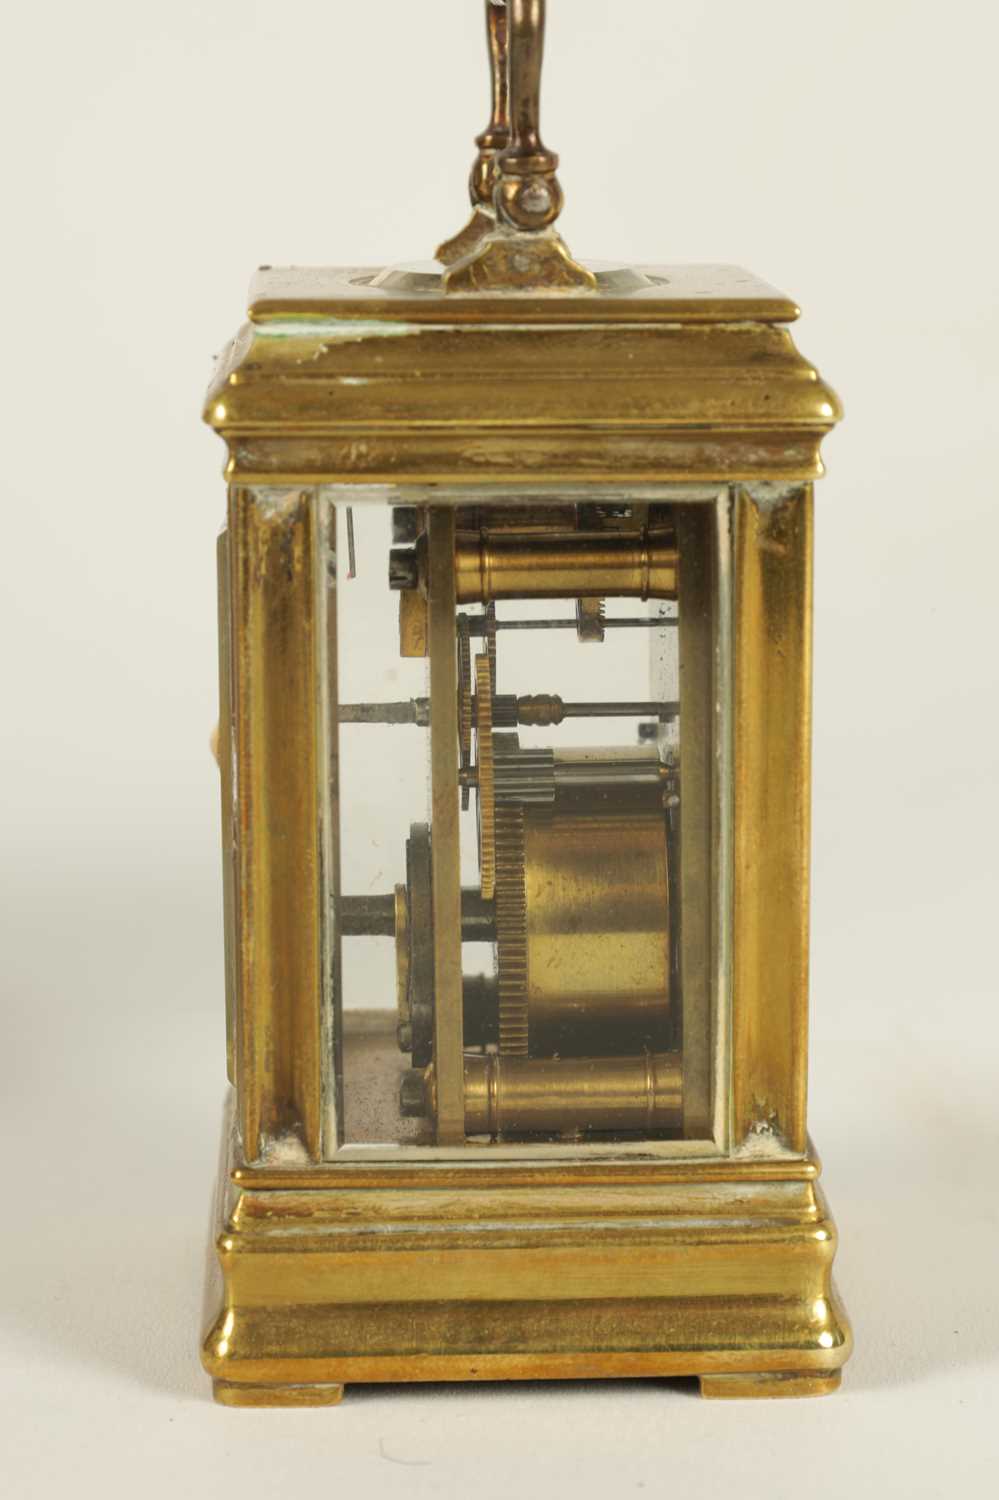 LE ROY & FILS, 57 NEW BOND STREET, LONDON. A LATE 19TH CENTURY FRENCH BRASS CASED MINIATURE CARRIAGE - Image 5 of 12